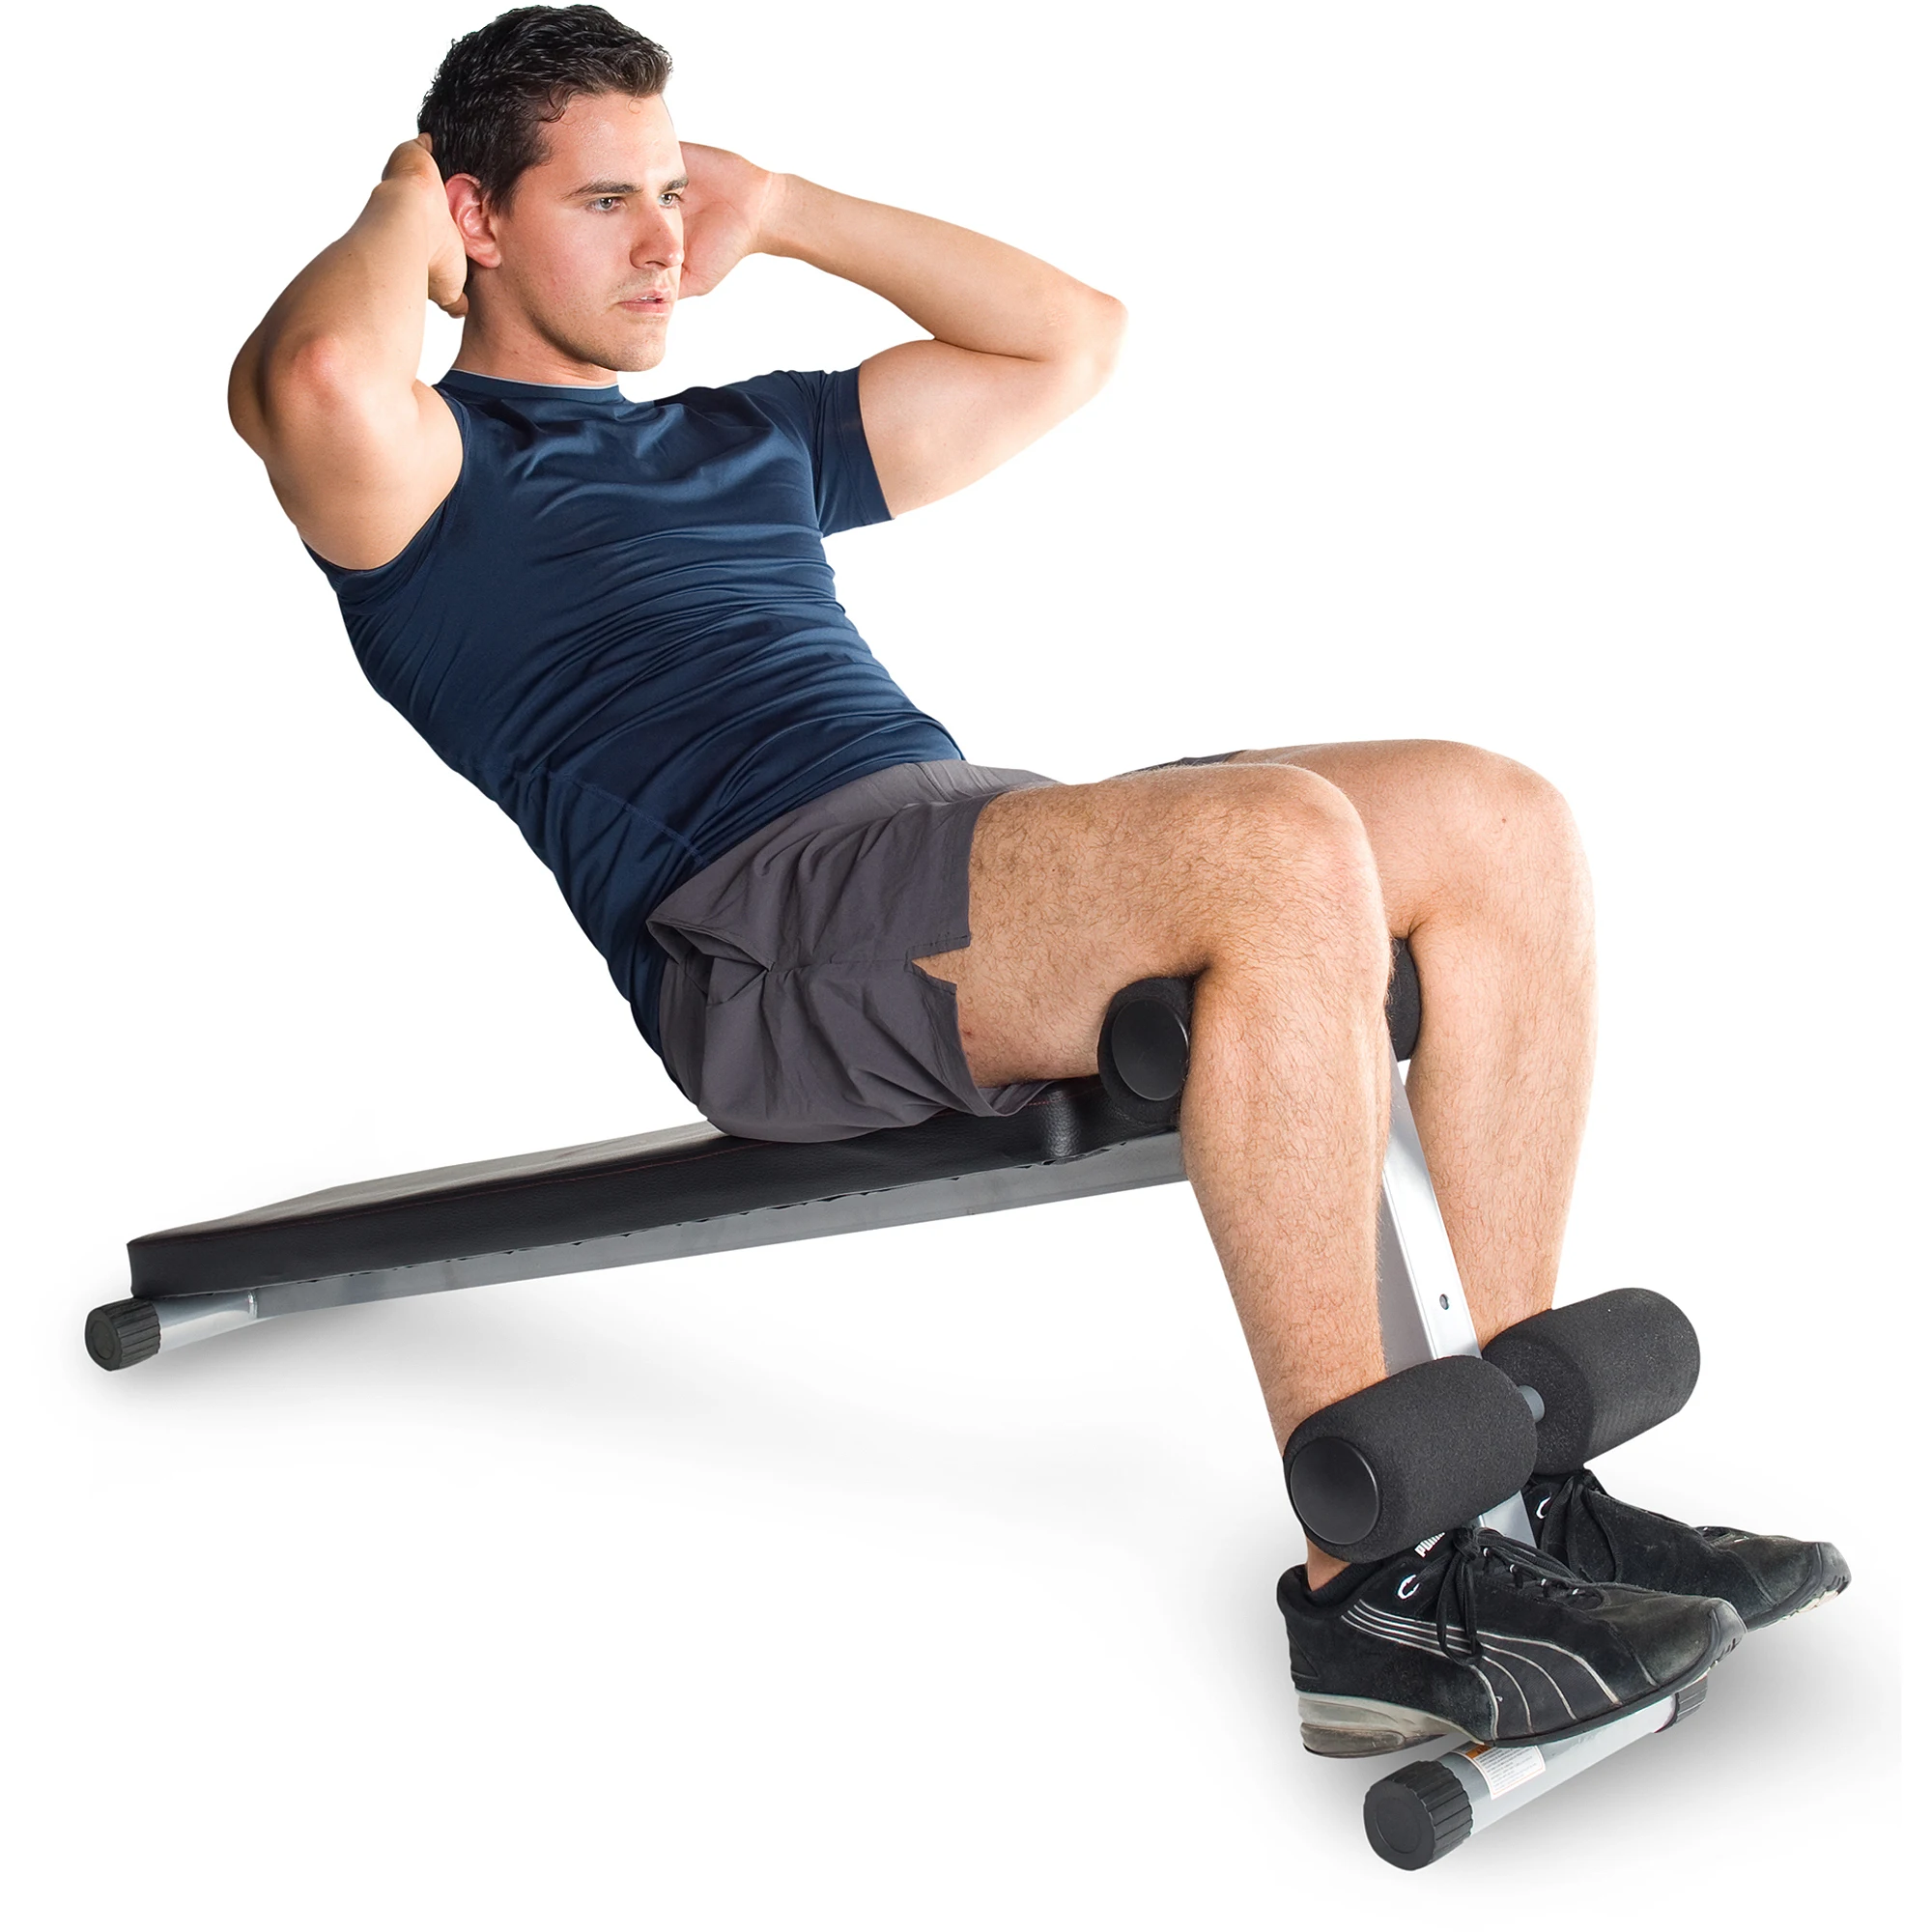 Strength Slant Board, Adjustable Height Sit-Up Bench, For Abdominal & Core Muscle Exercises, Home Gym Fitness Equipment